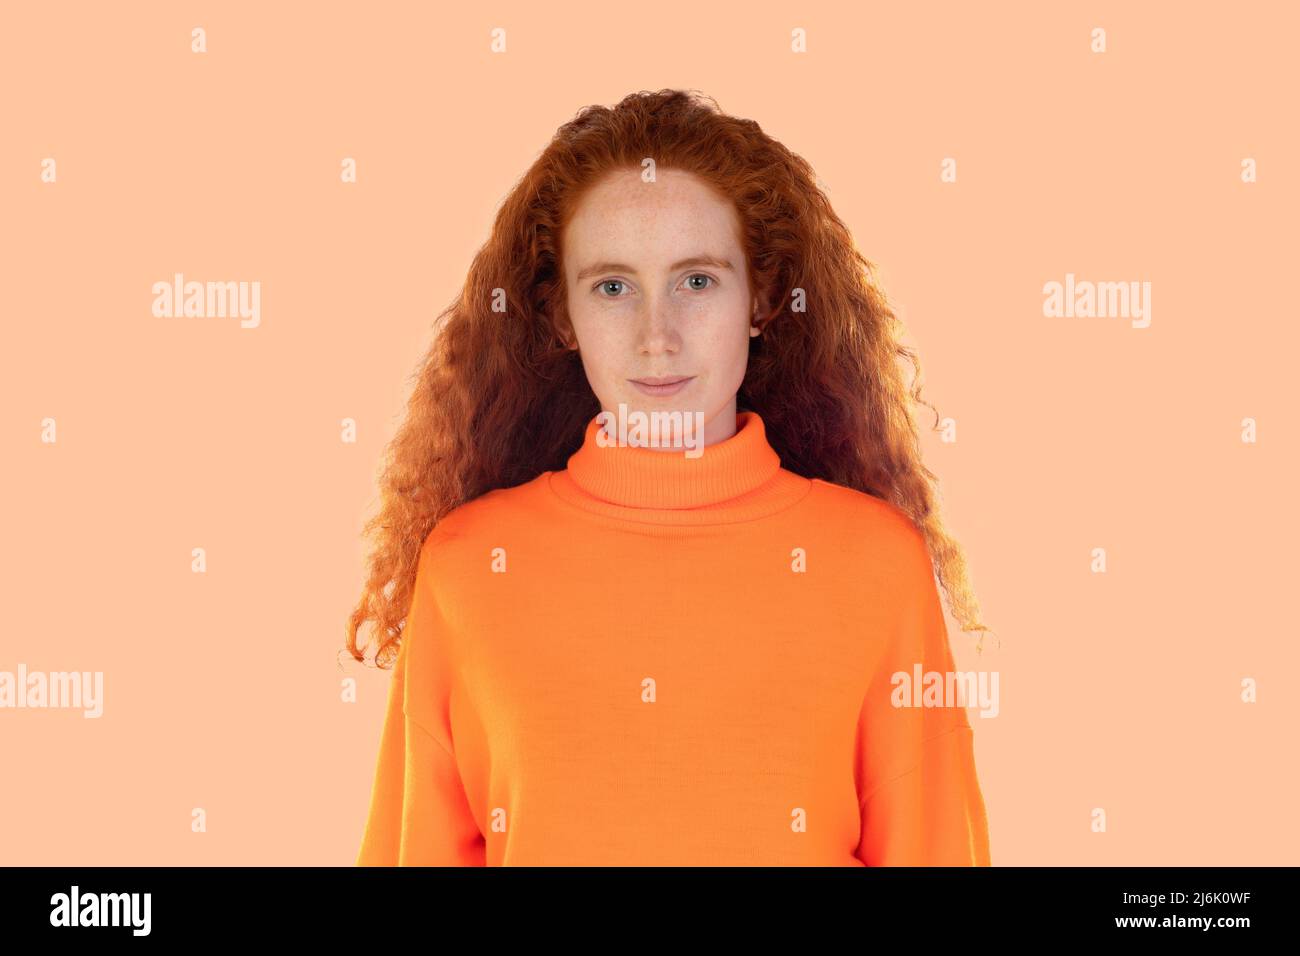 Pensive redhaired girl isolated on a orange background Stock Photo